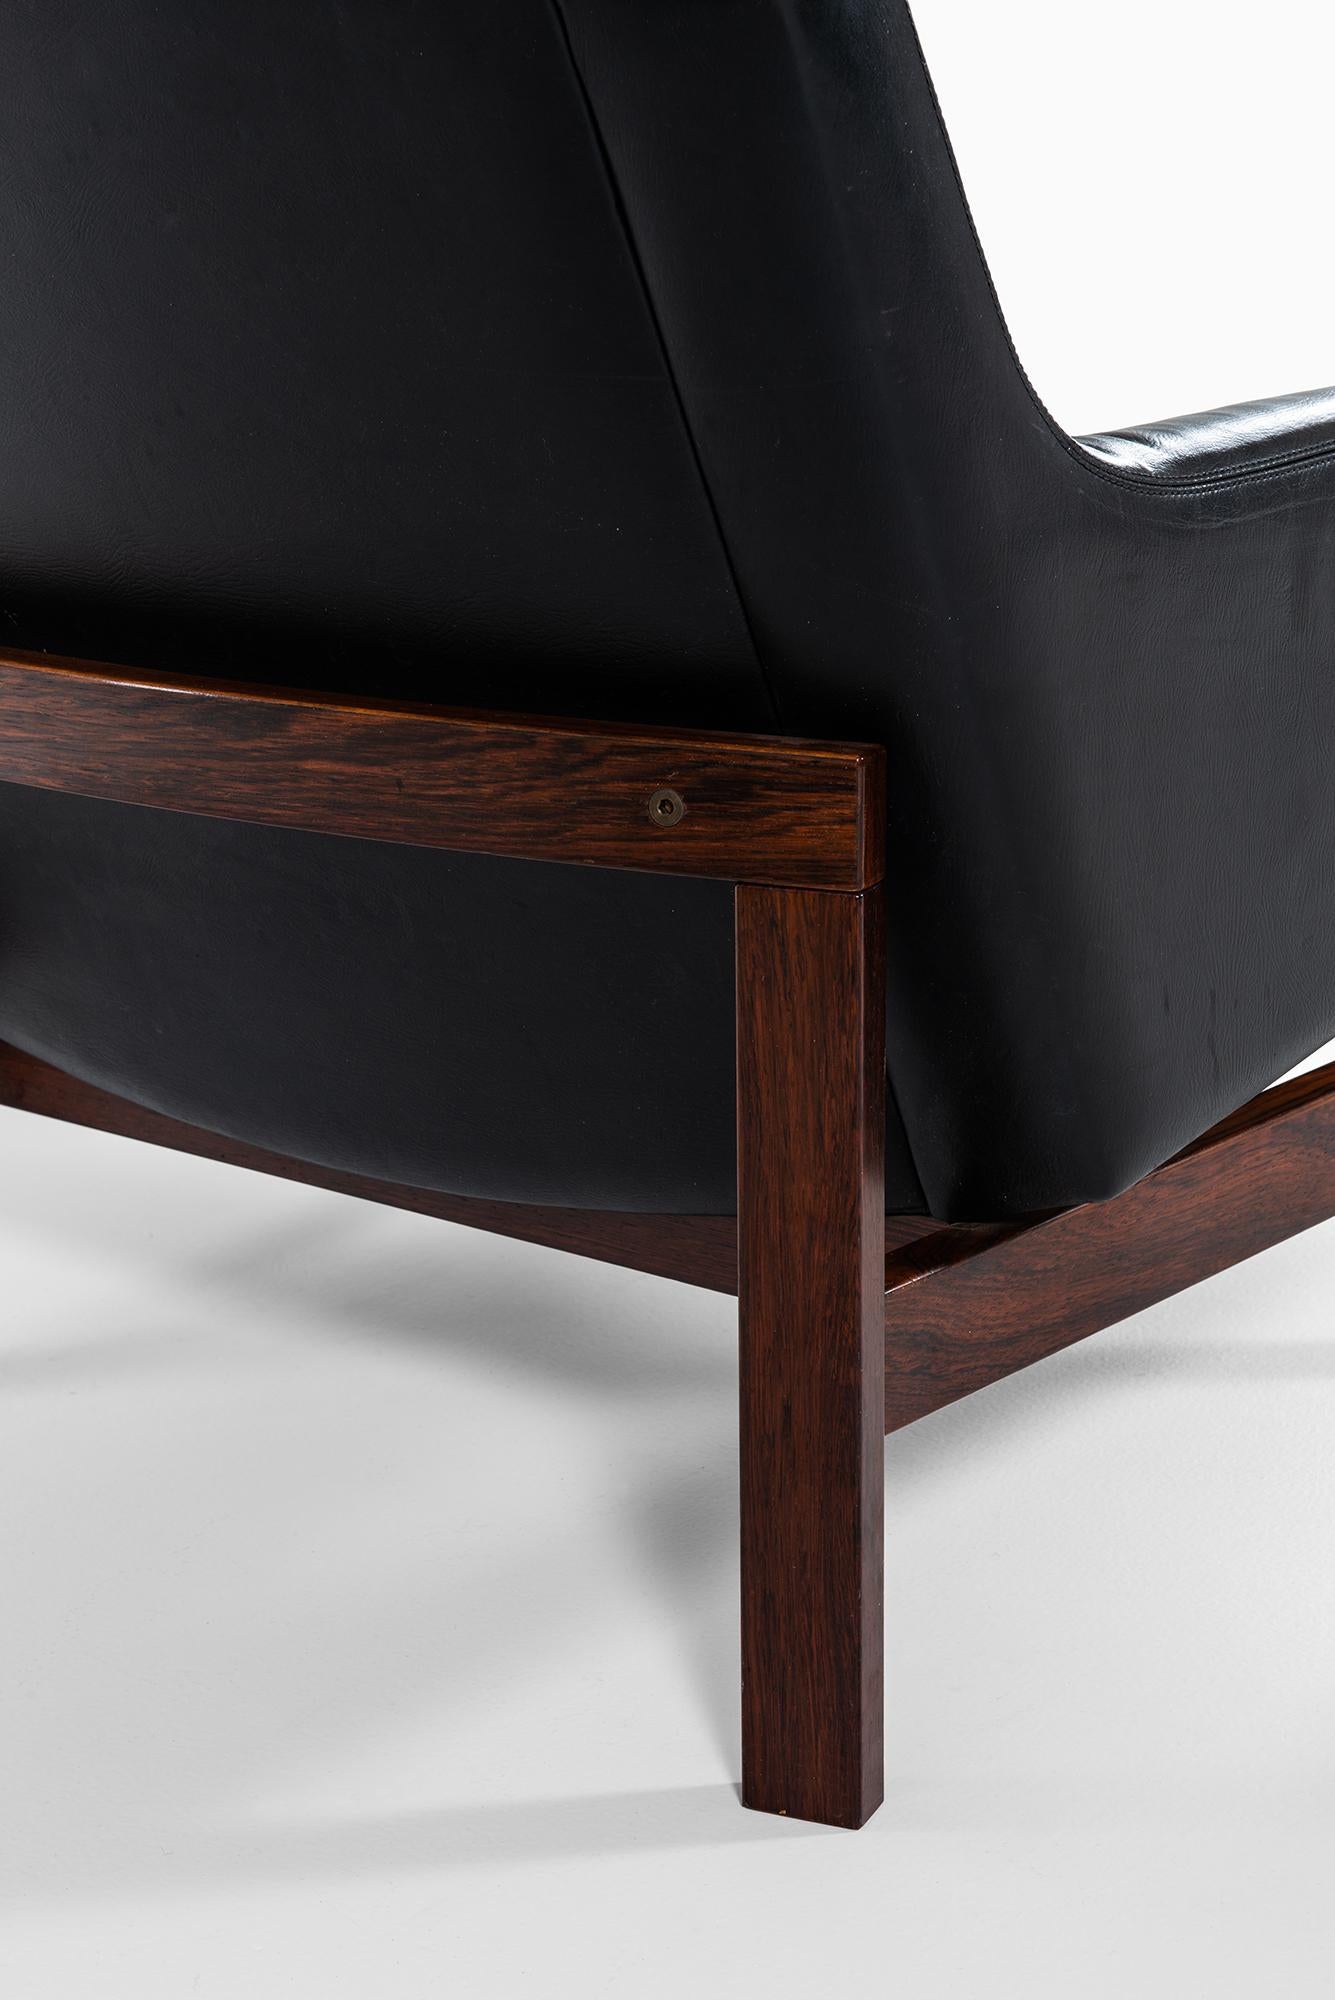 Mid-20th Century Pair of Easy Chairs in Rosewood and Black Leather Produced in Sweden